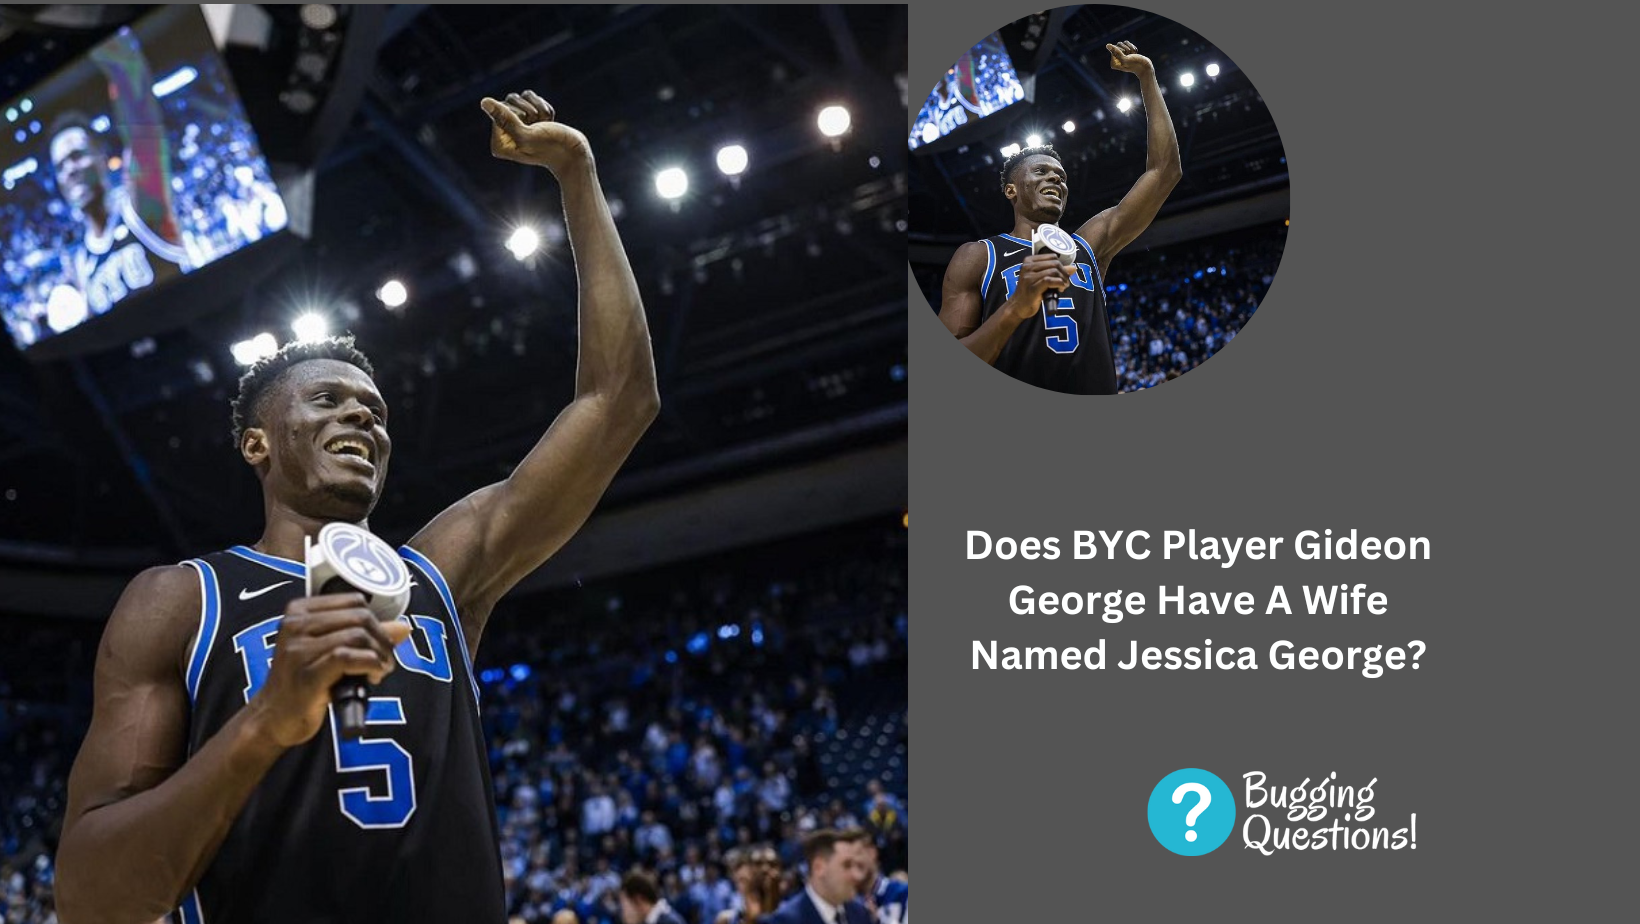 Does BYC Player Gideon George Have A Wife Named Jessica George?